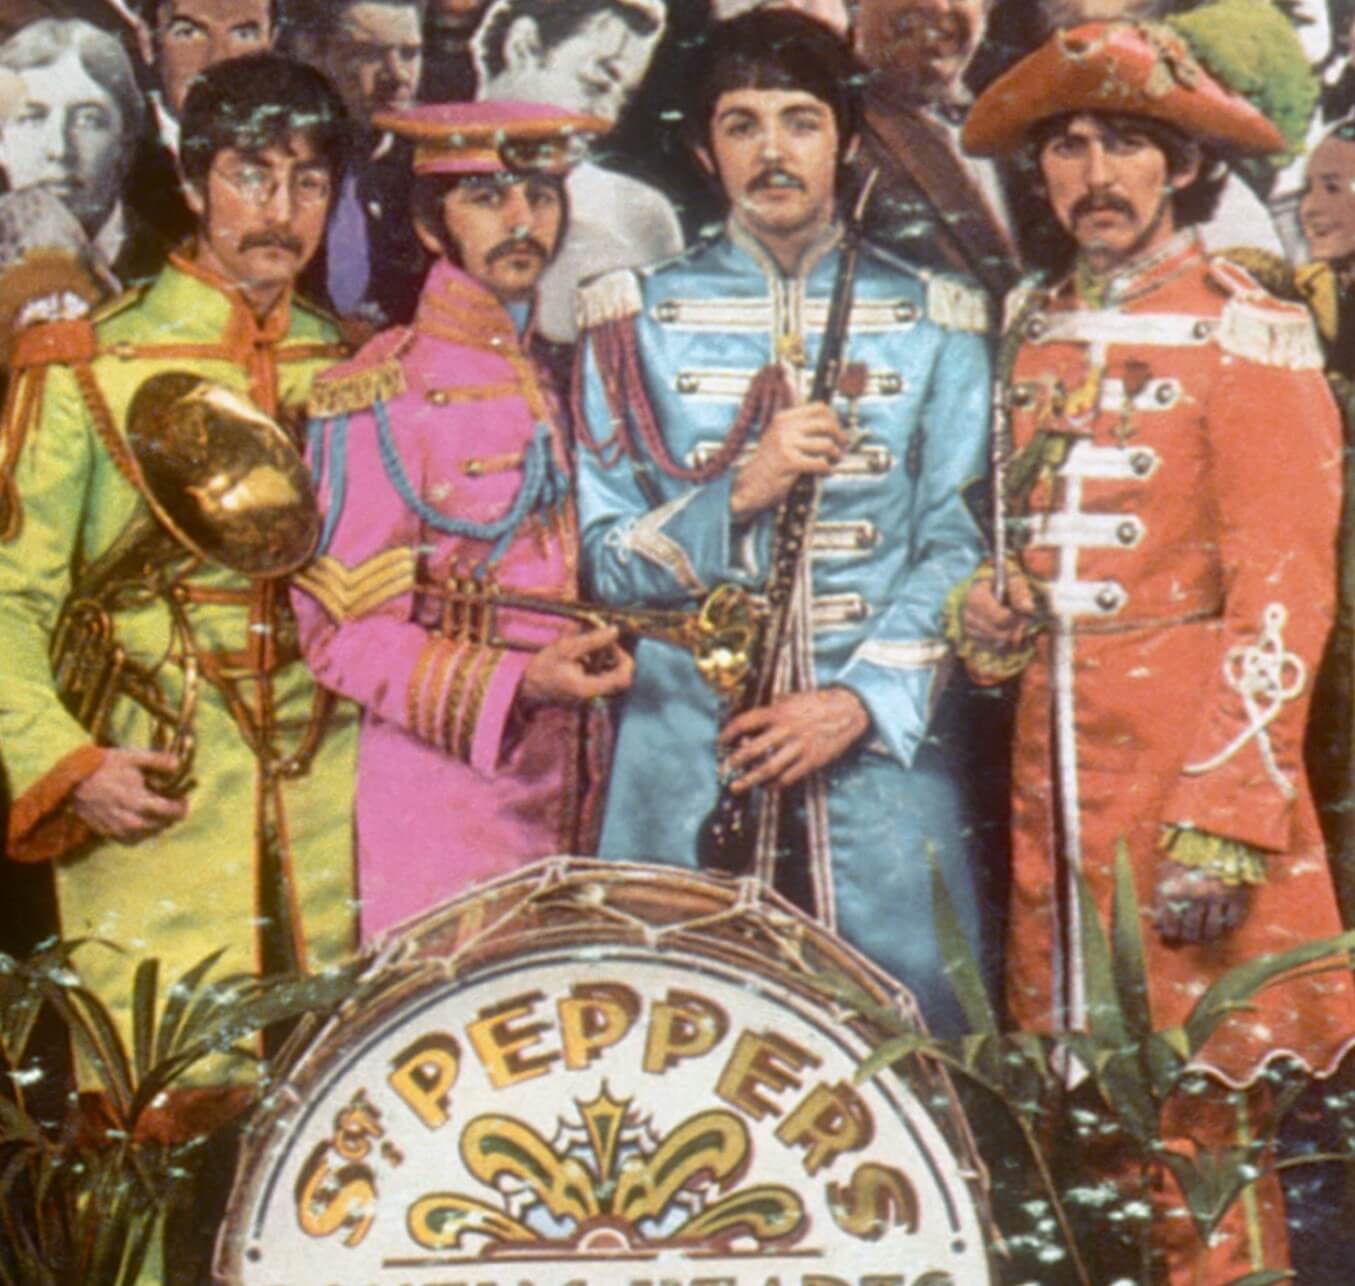 How a Beatles Movie Did a Musical Scene Underwater